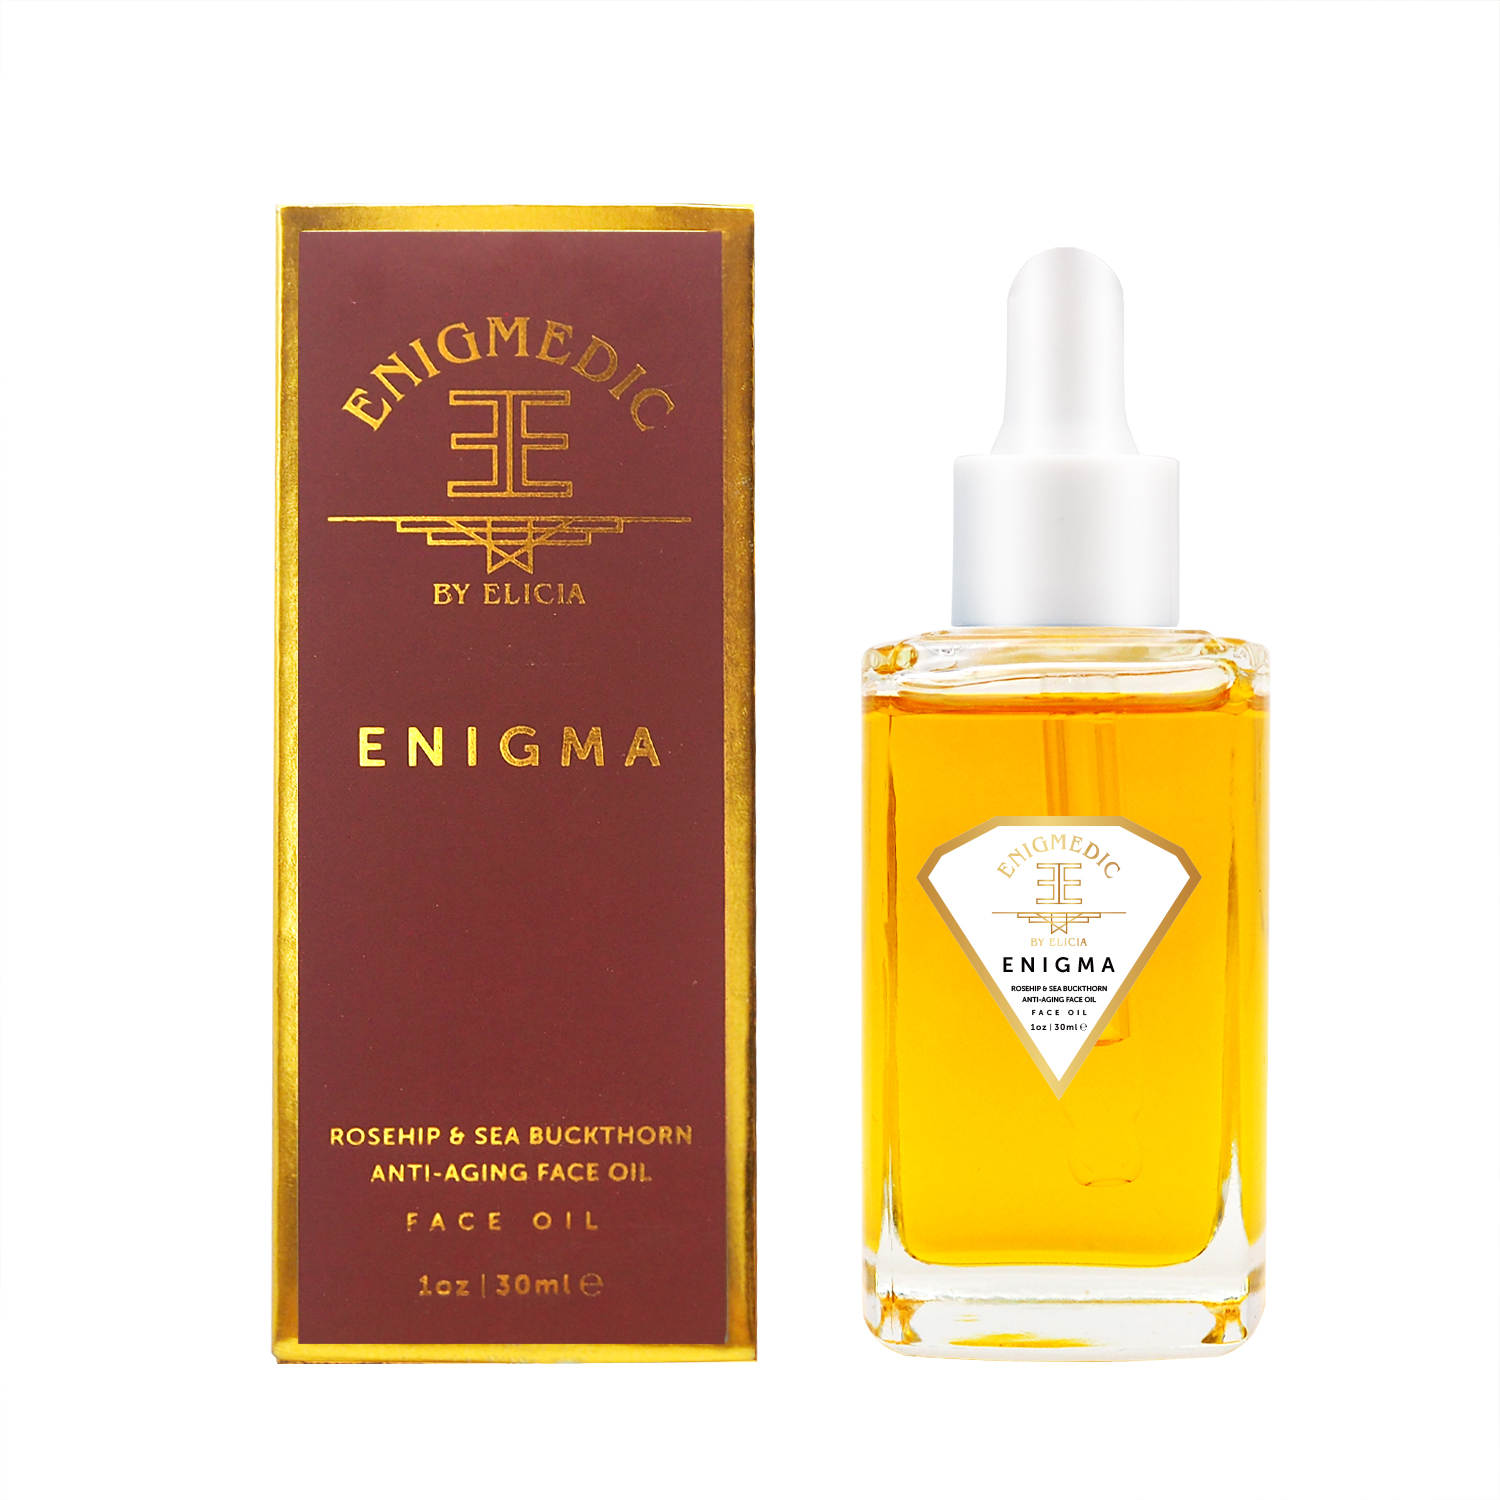 Enigma - Rosehip & Sea buckthorn Anti-Aging Face Oil - For Dry Skin